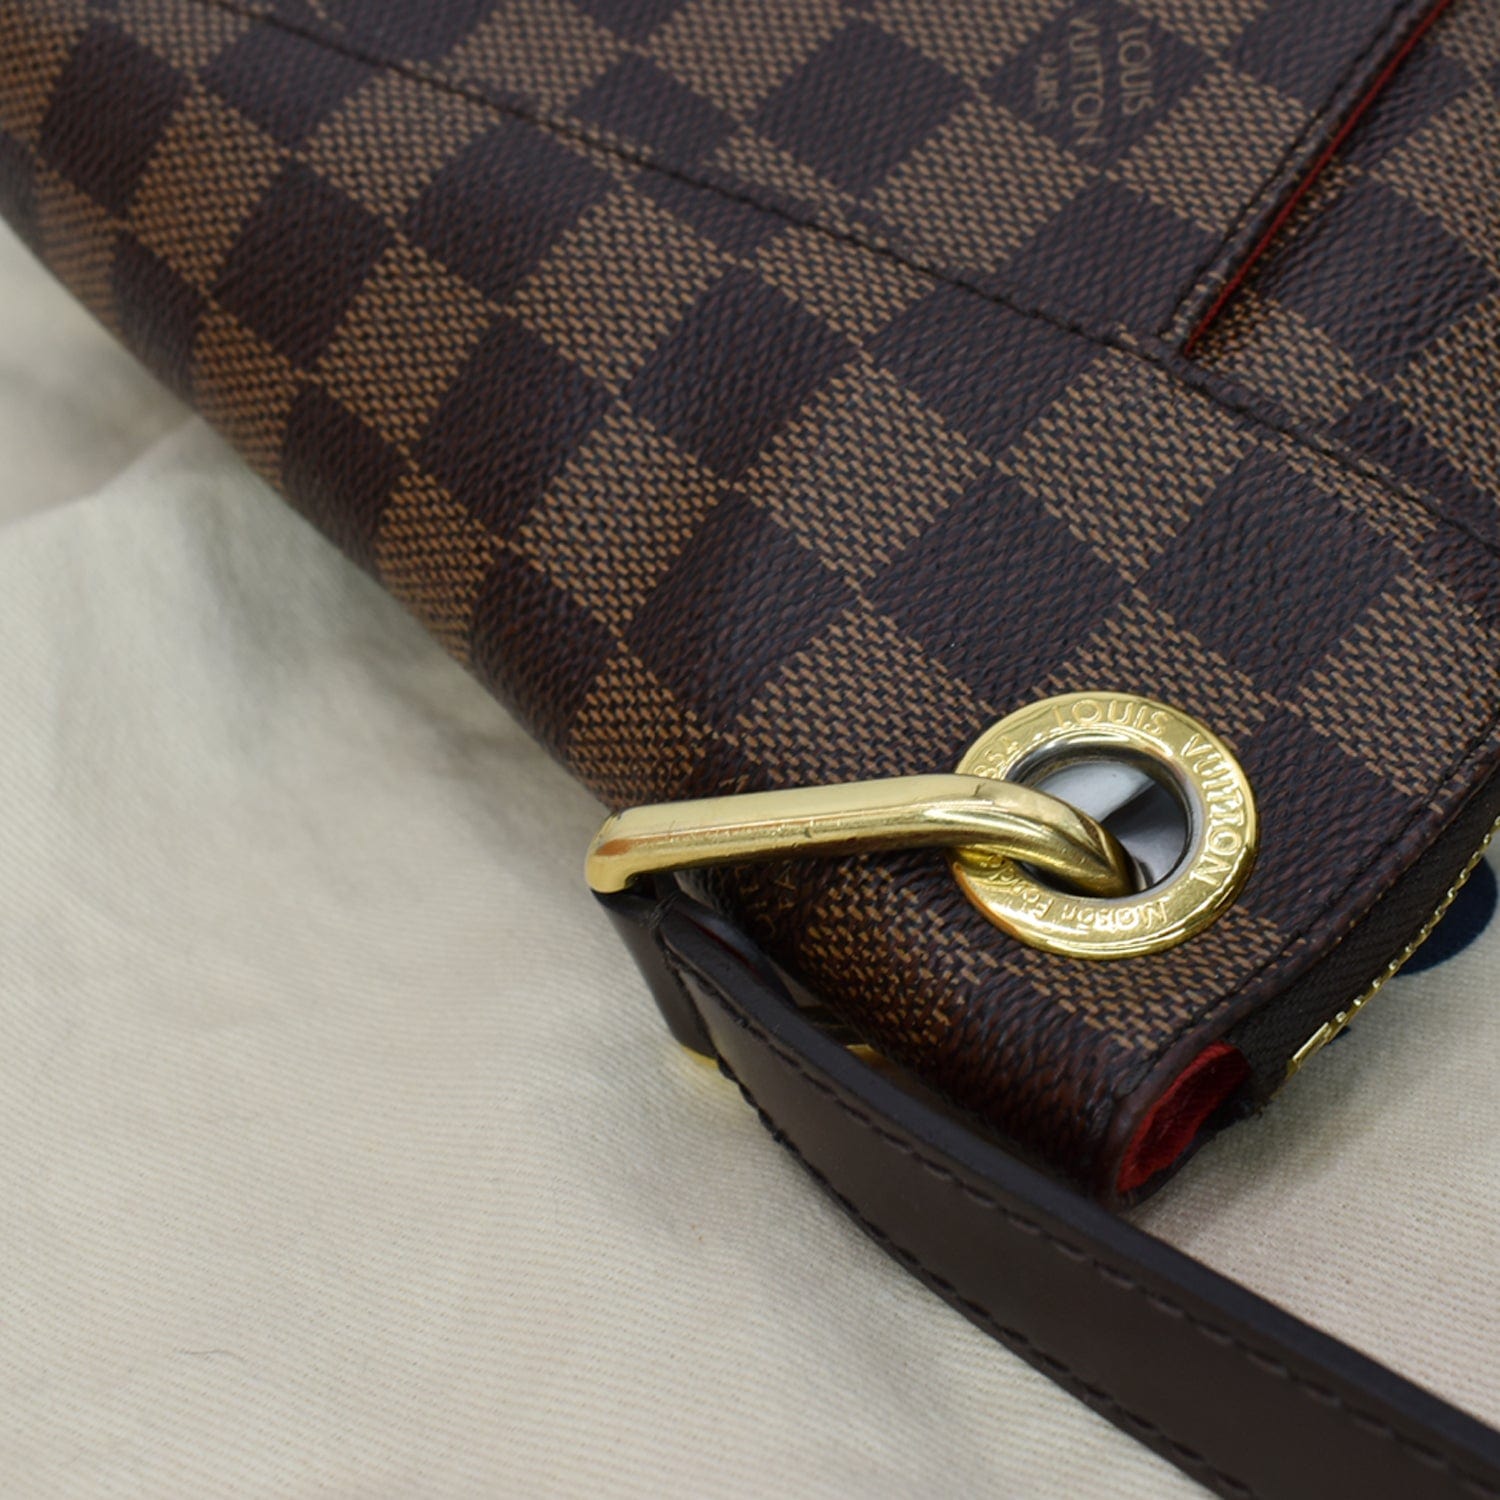 My Review on the Louis Vuitton South Bank bag 